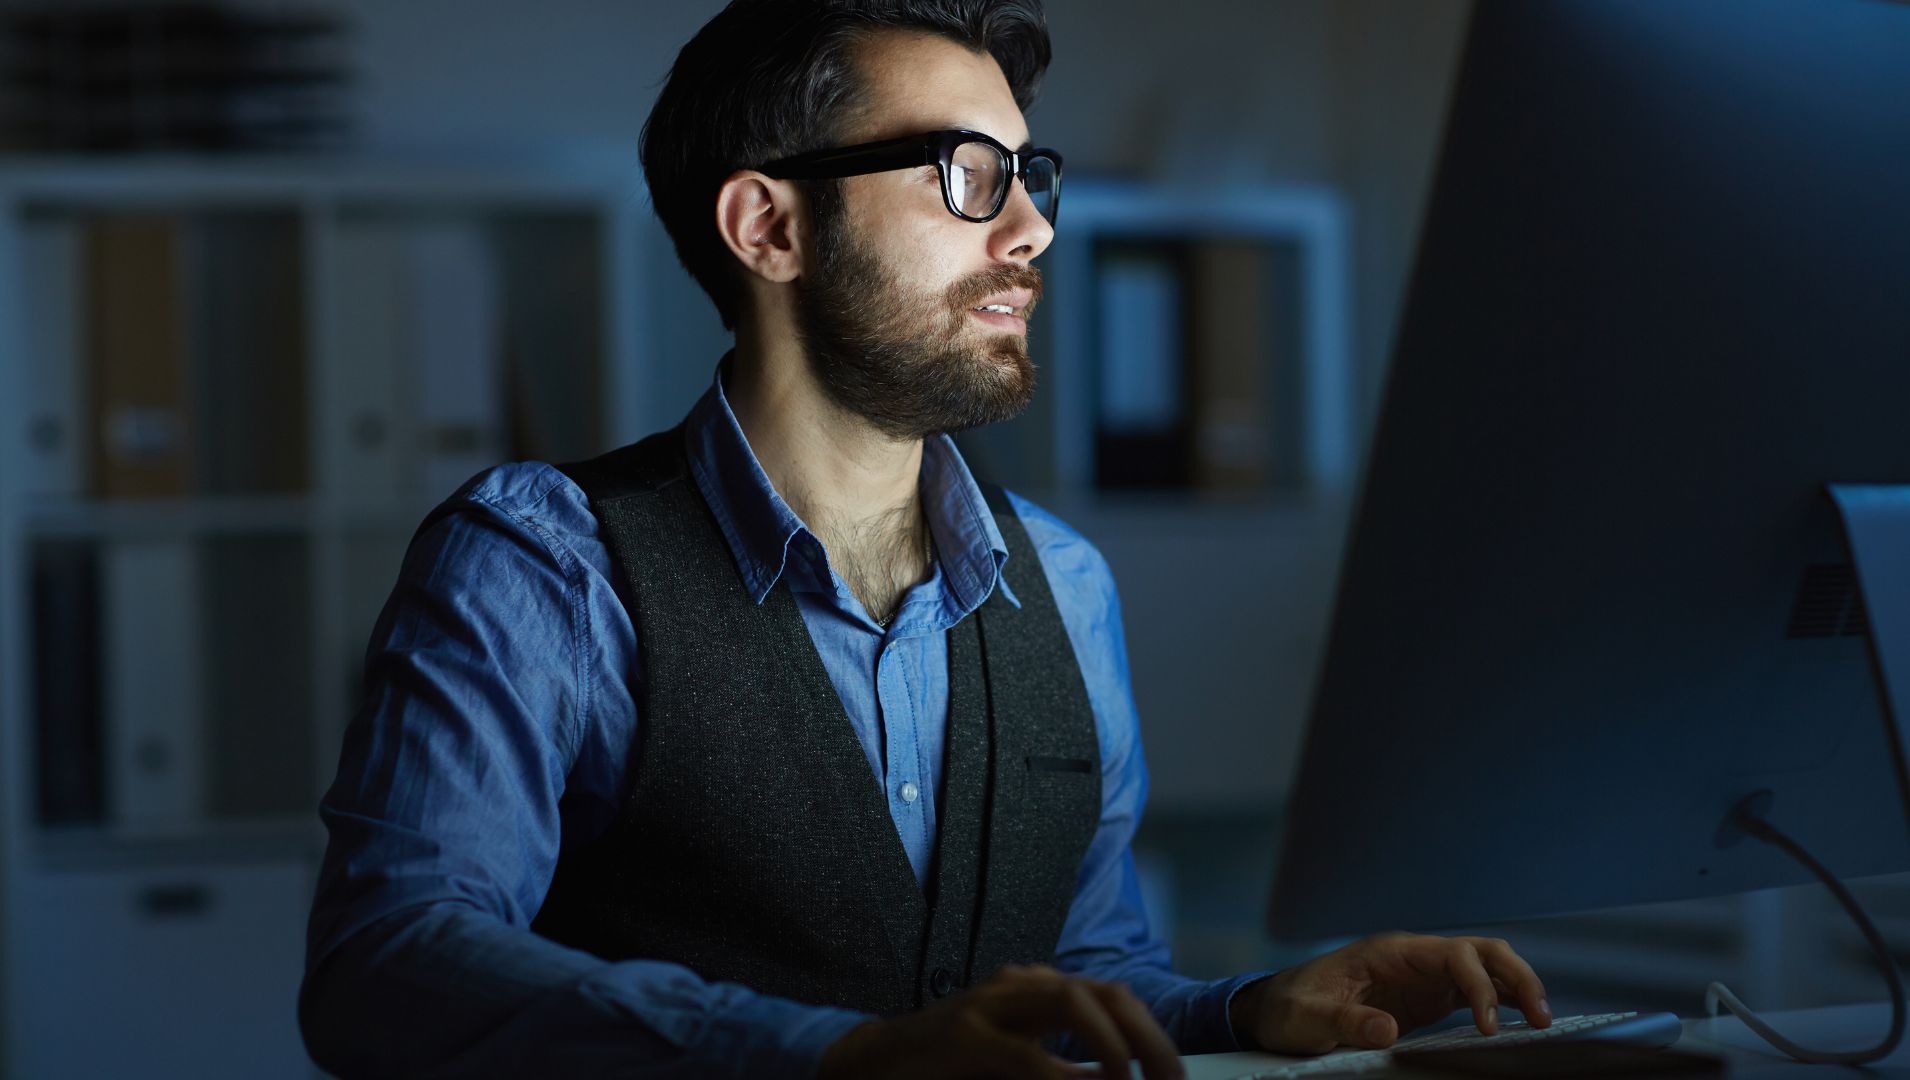 Man looks at a computer in a dark office at night